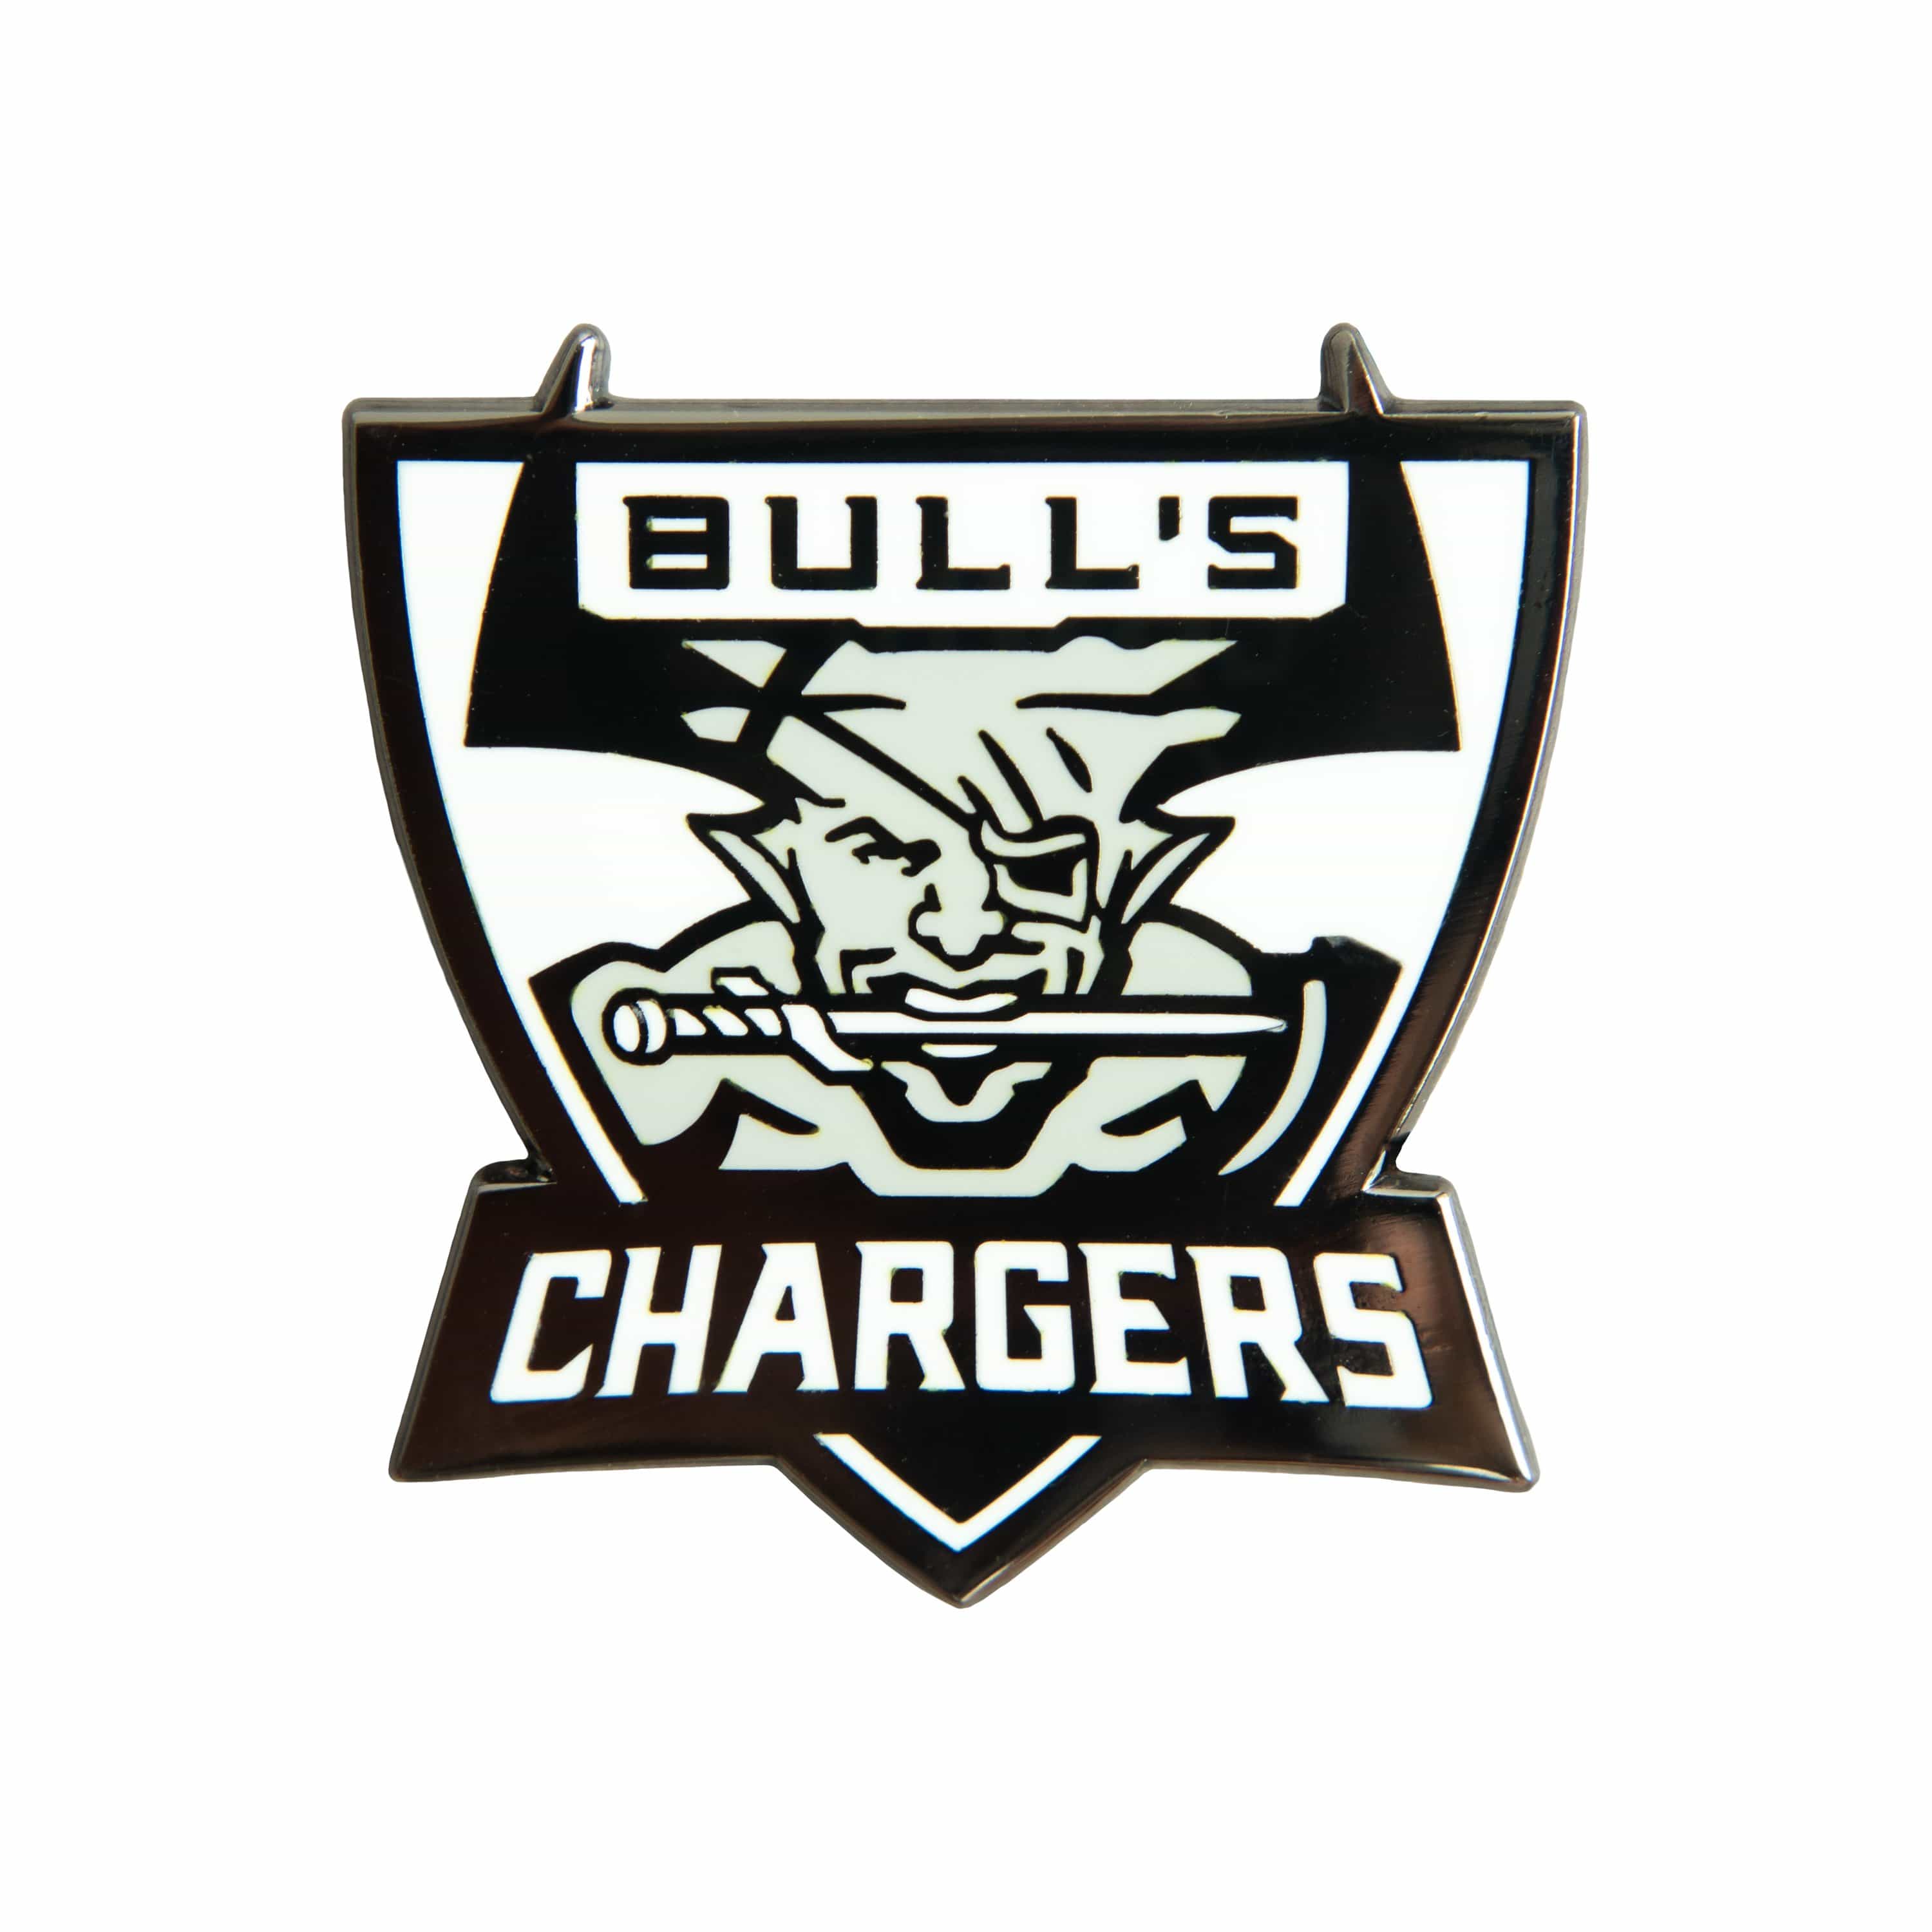 Dragon Age: Inquisition - Bull's Chargers Silver Plated Enamel Pin